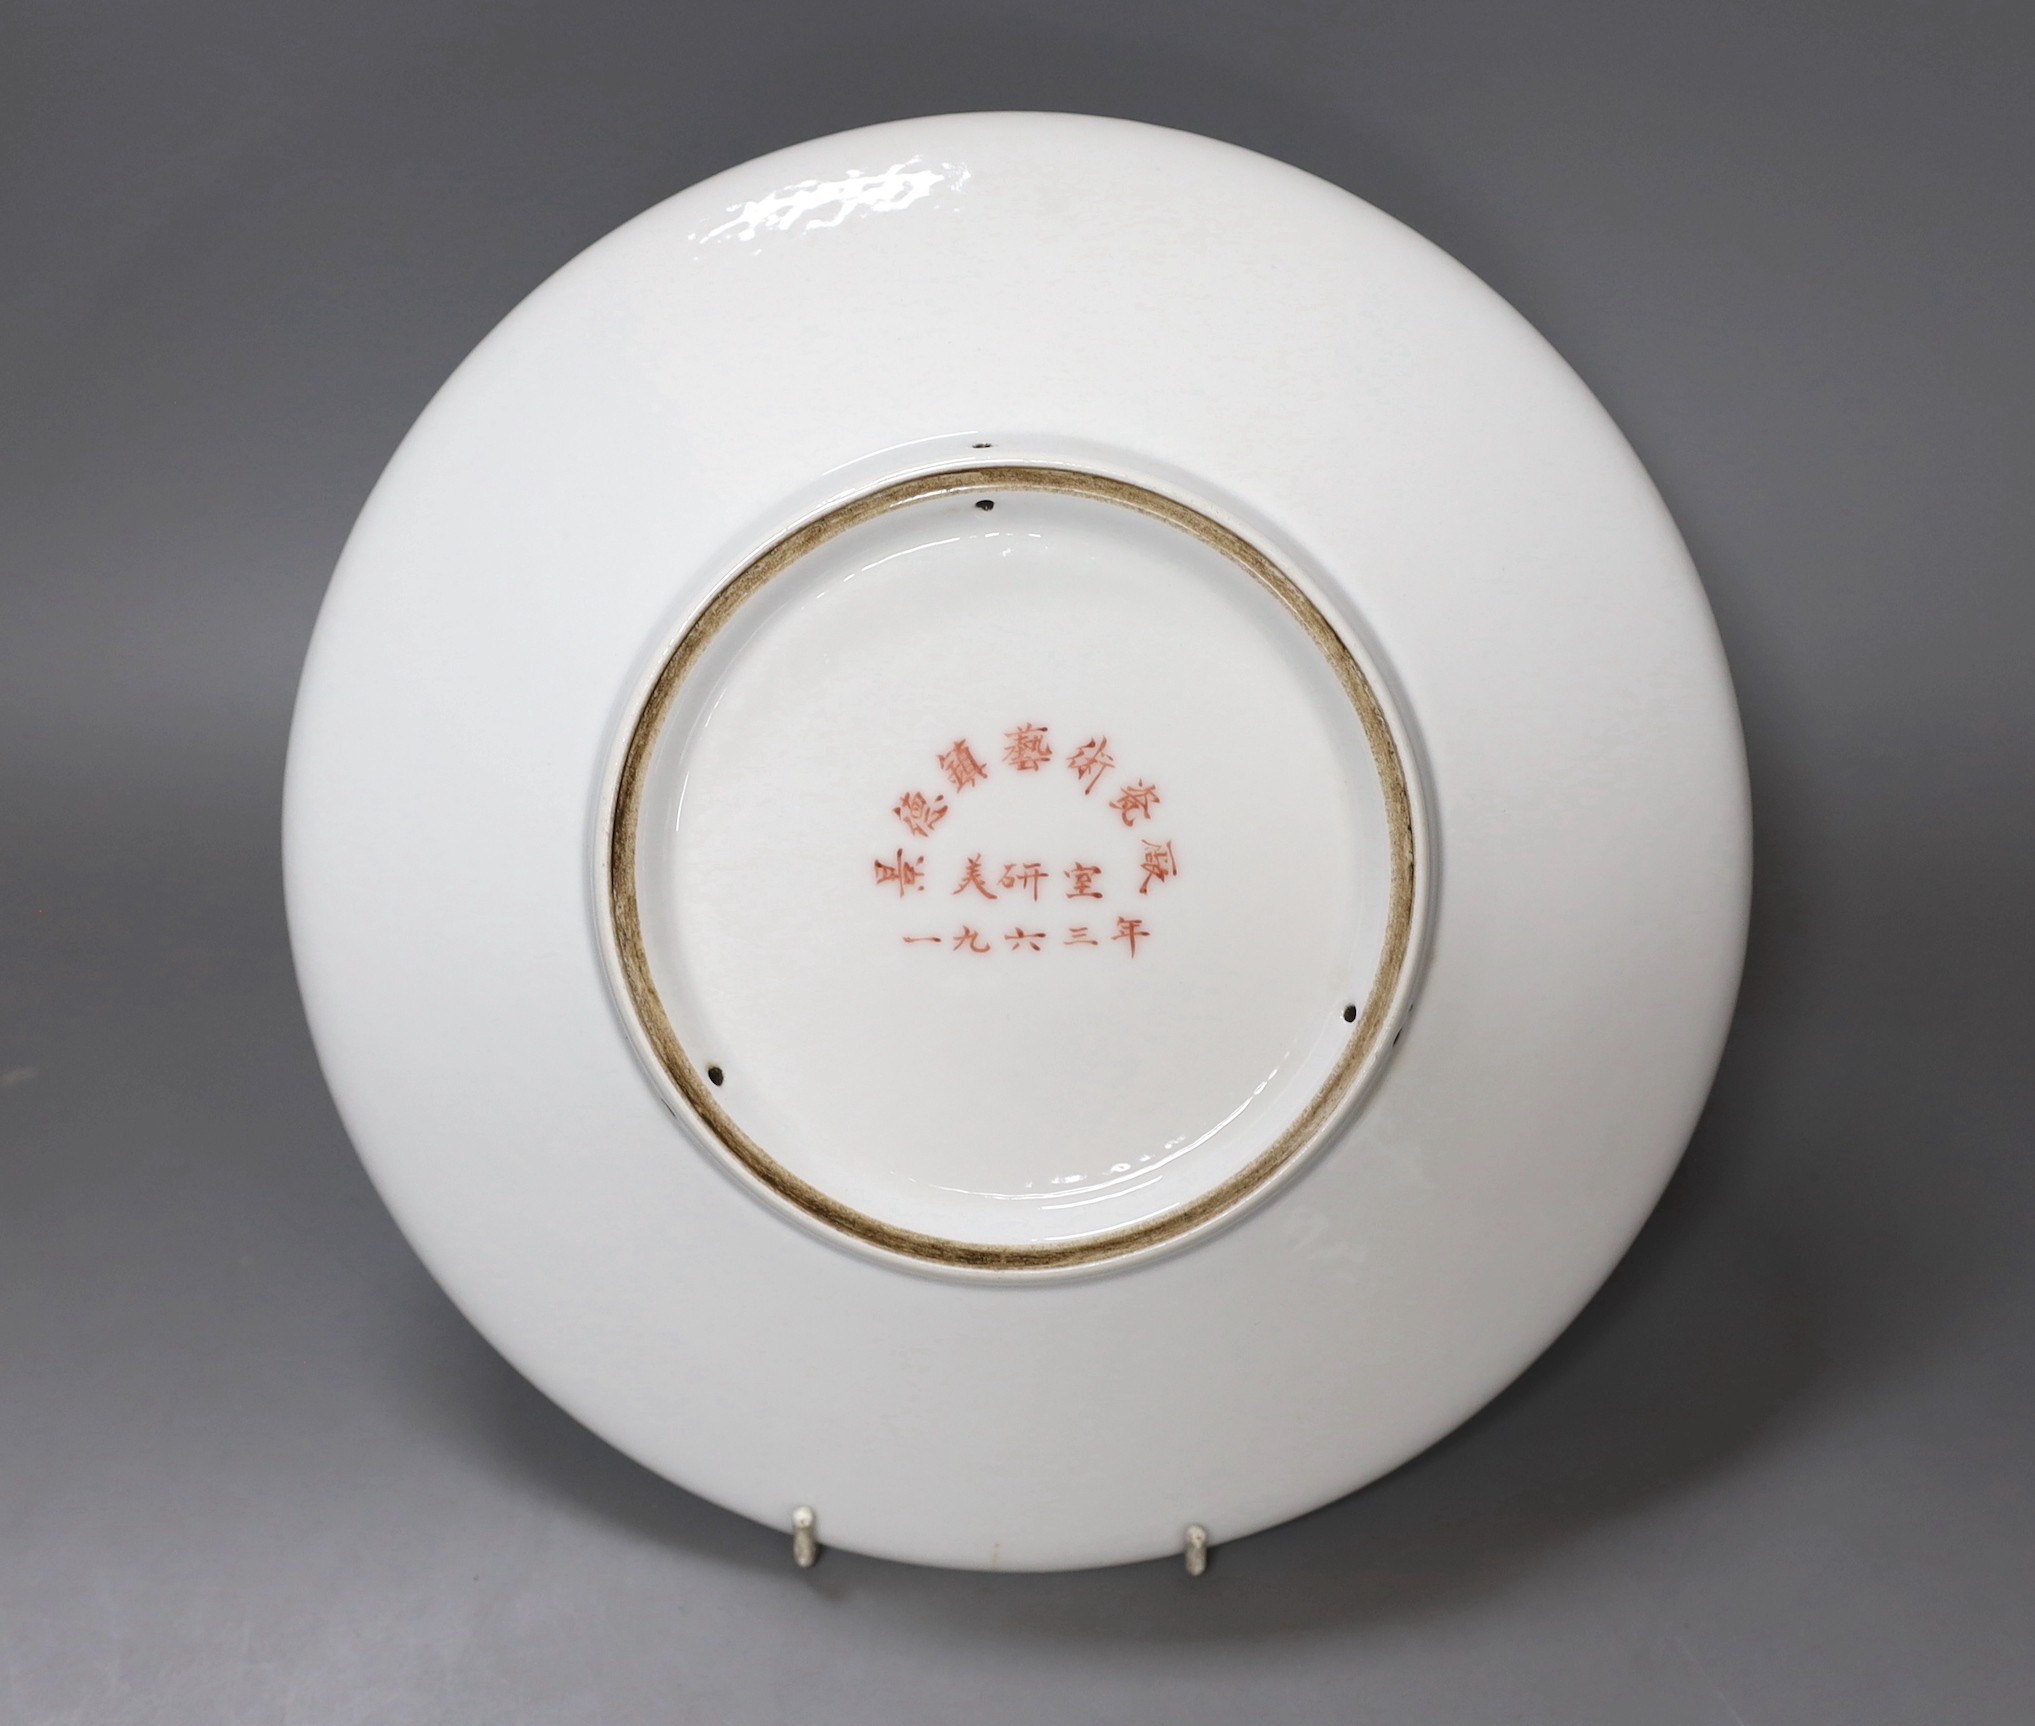 A Chinese famille rose plate of a walking figure with inscription, 28cm diameter